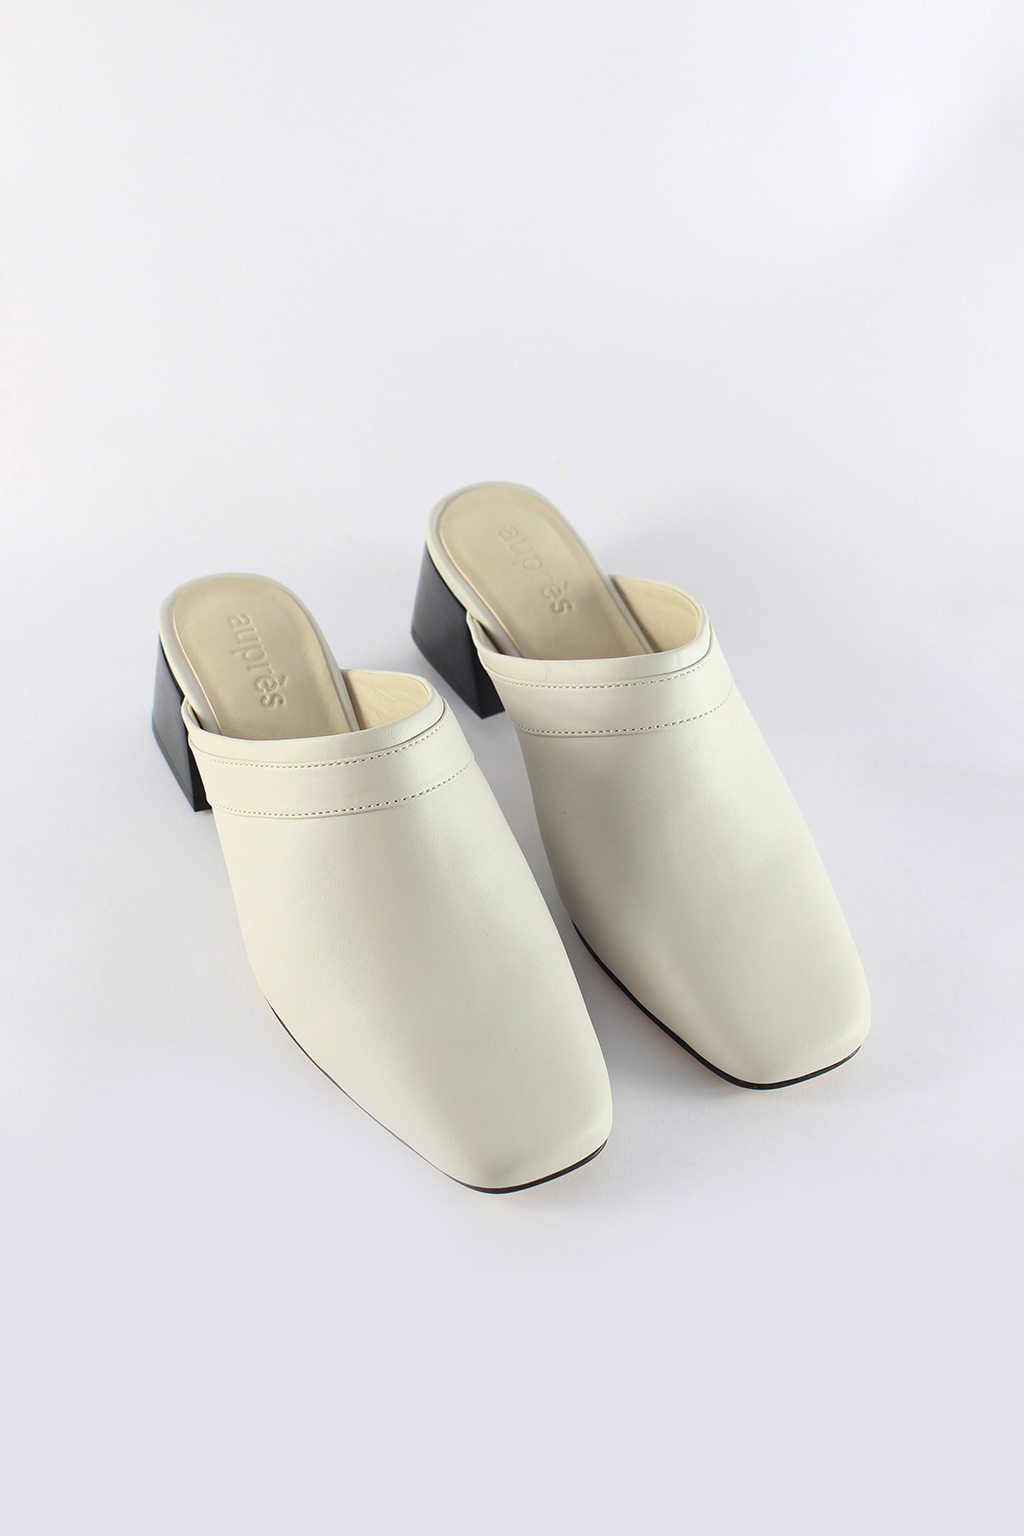 auprès | Gala Off-White slip-on leather mules